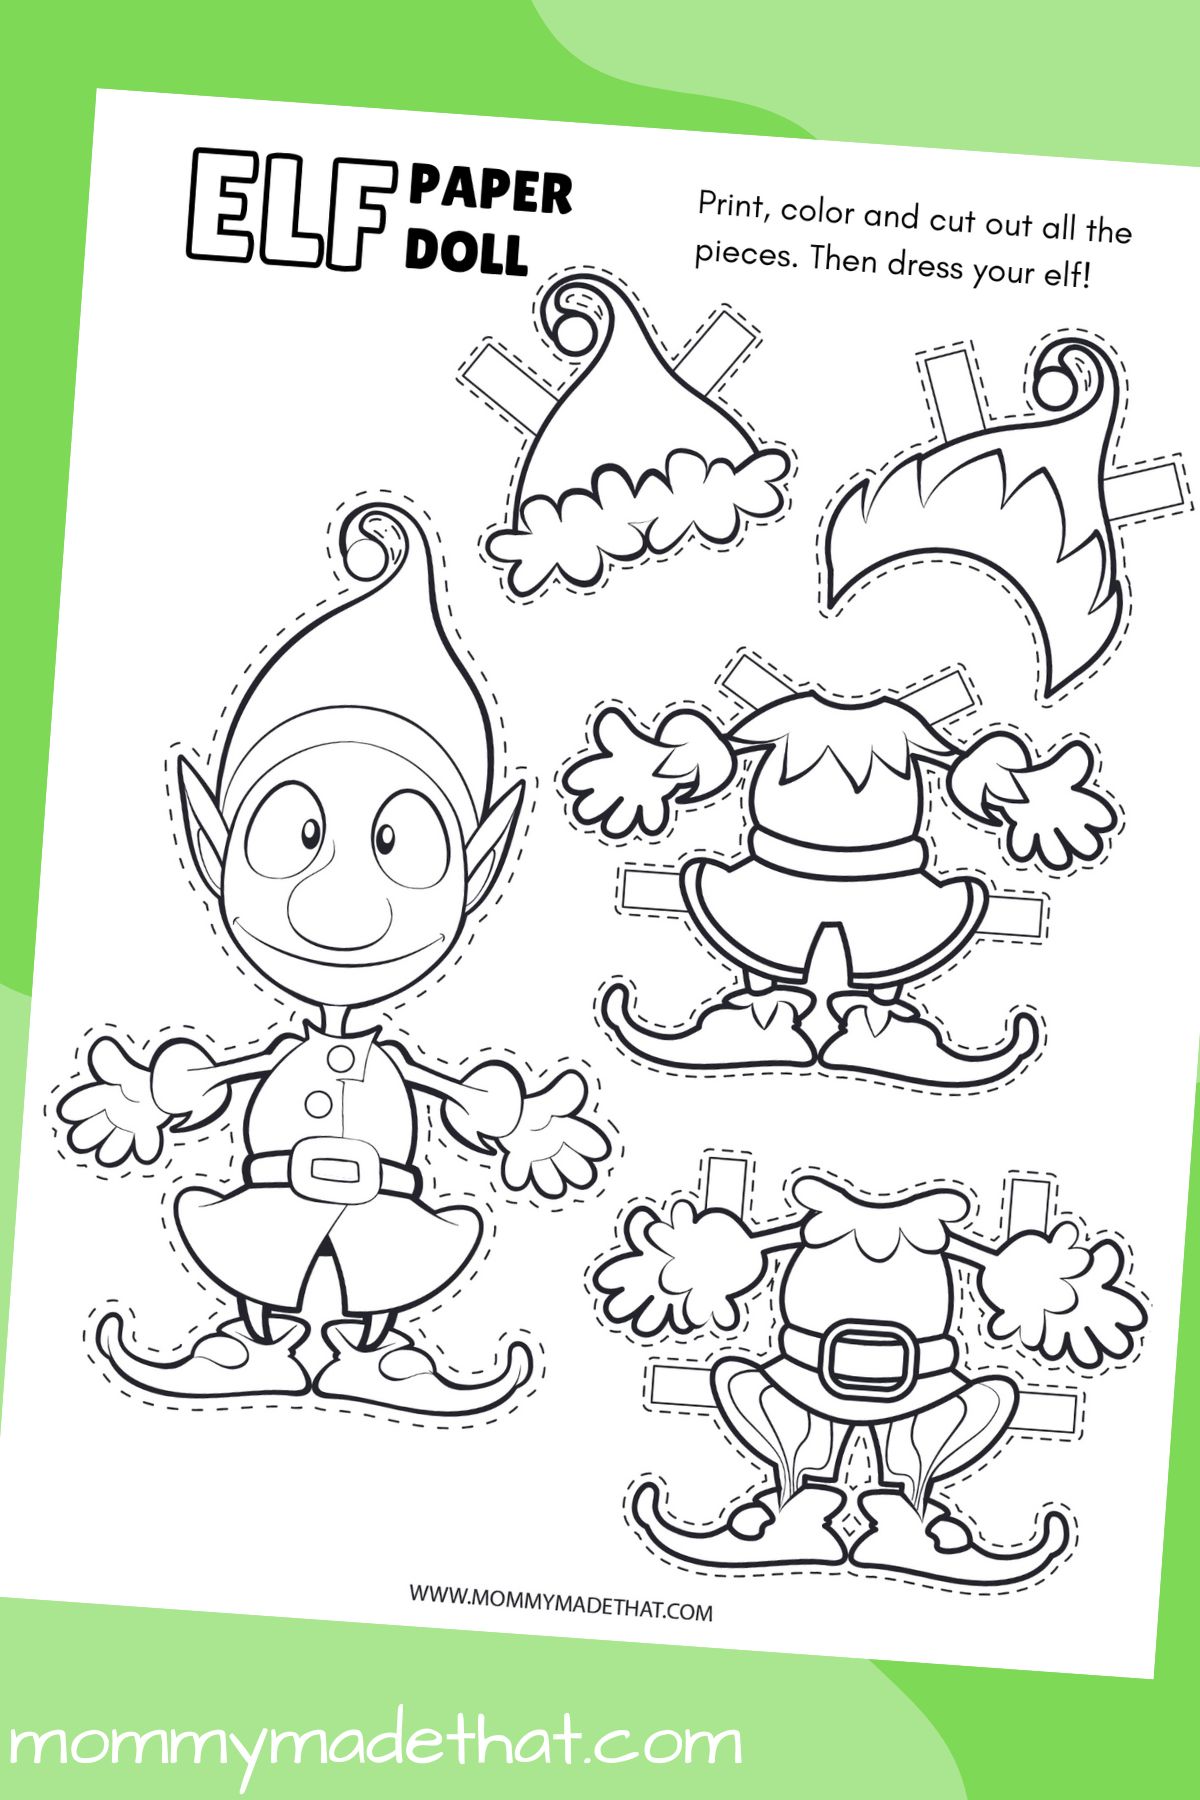 Elf paper doll grab the free printable template